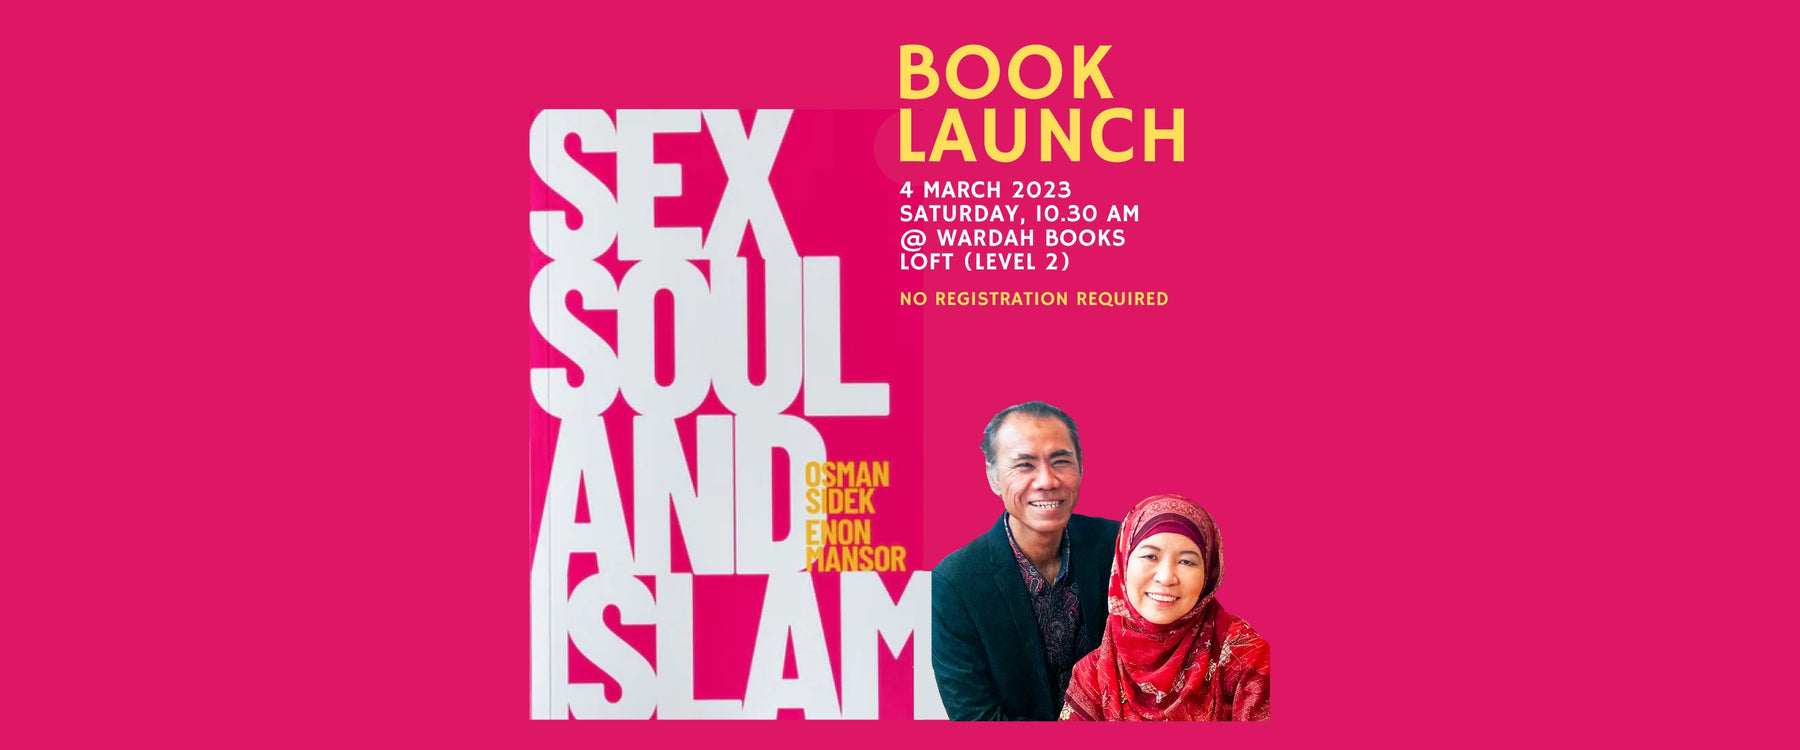 Book Launch - Sex, Soul and Islam